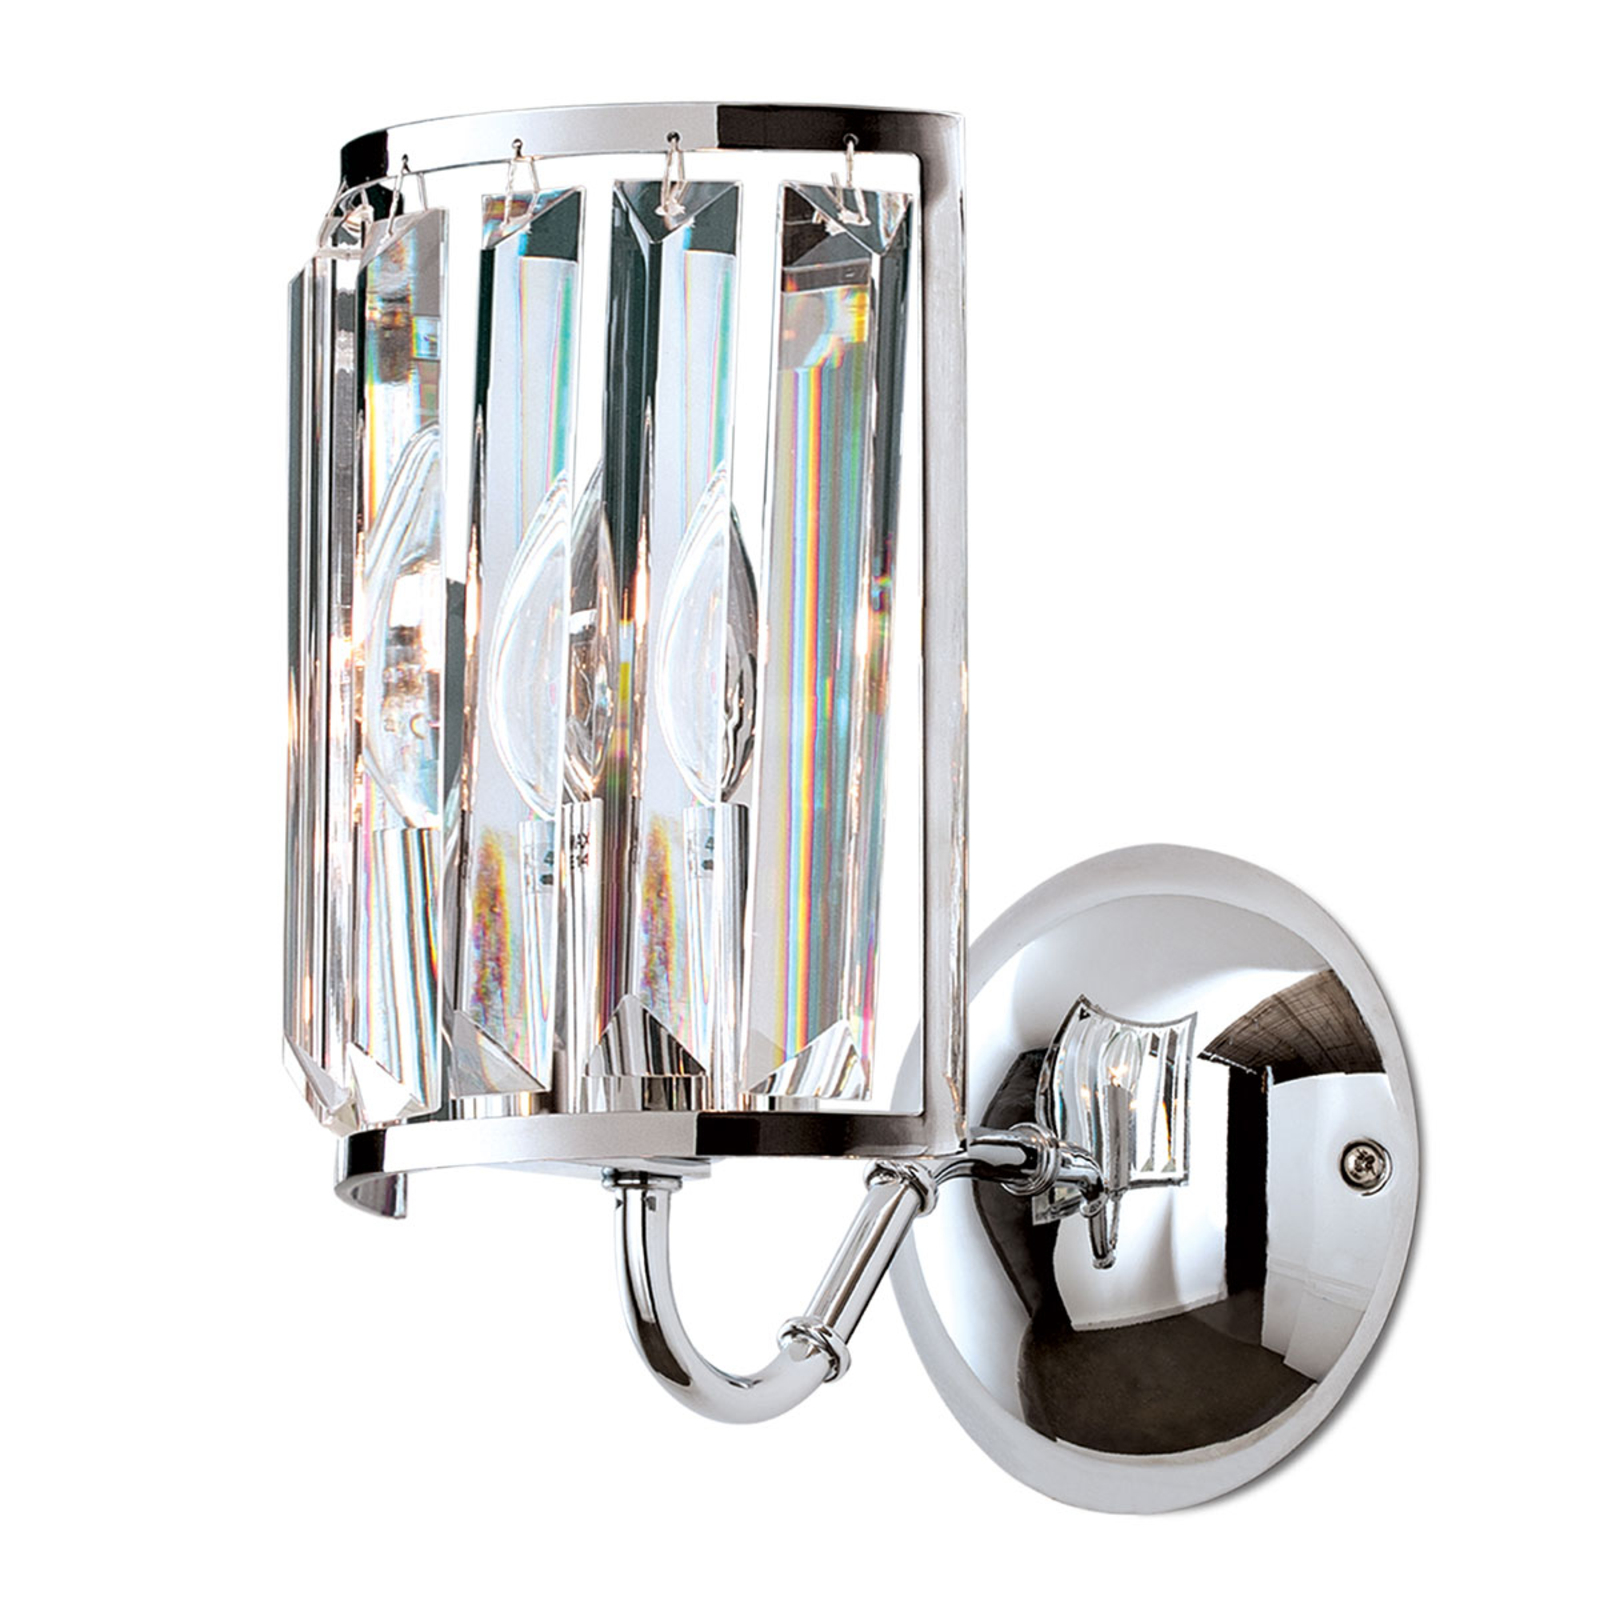 Gstaad wall light adorned with crystals